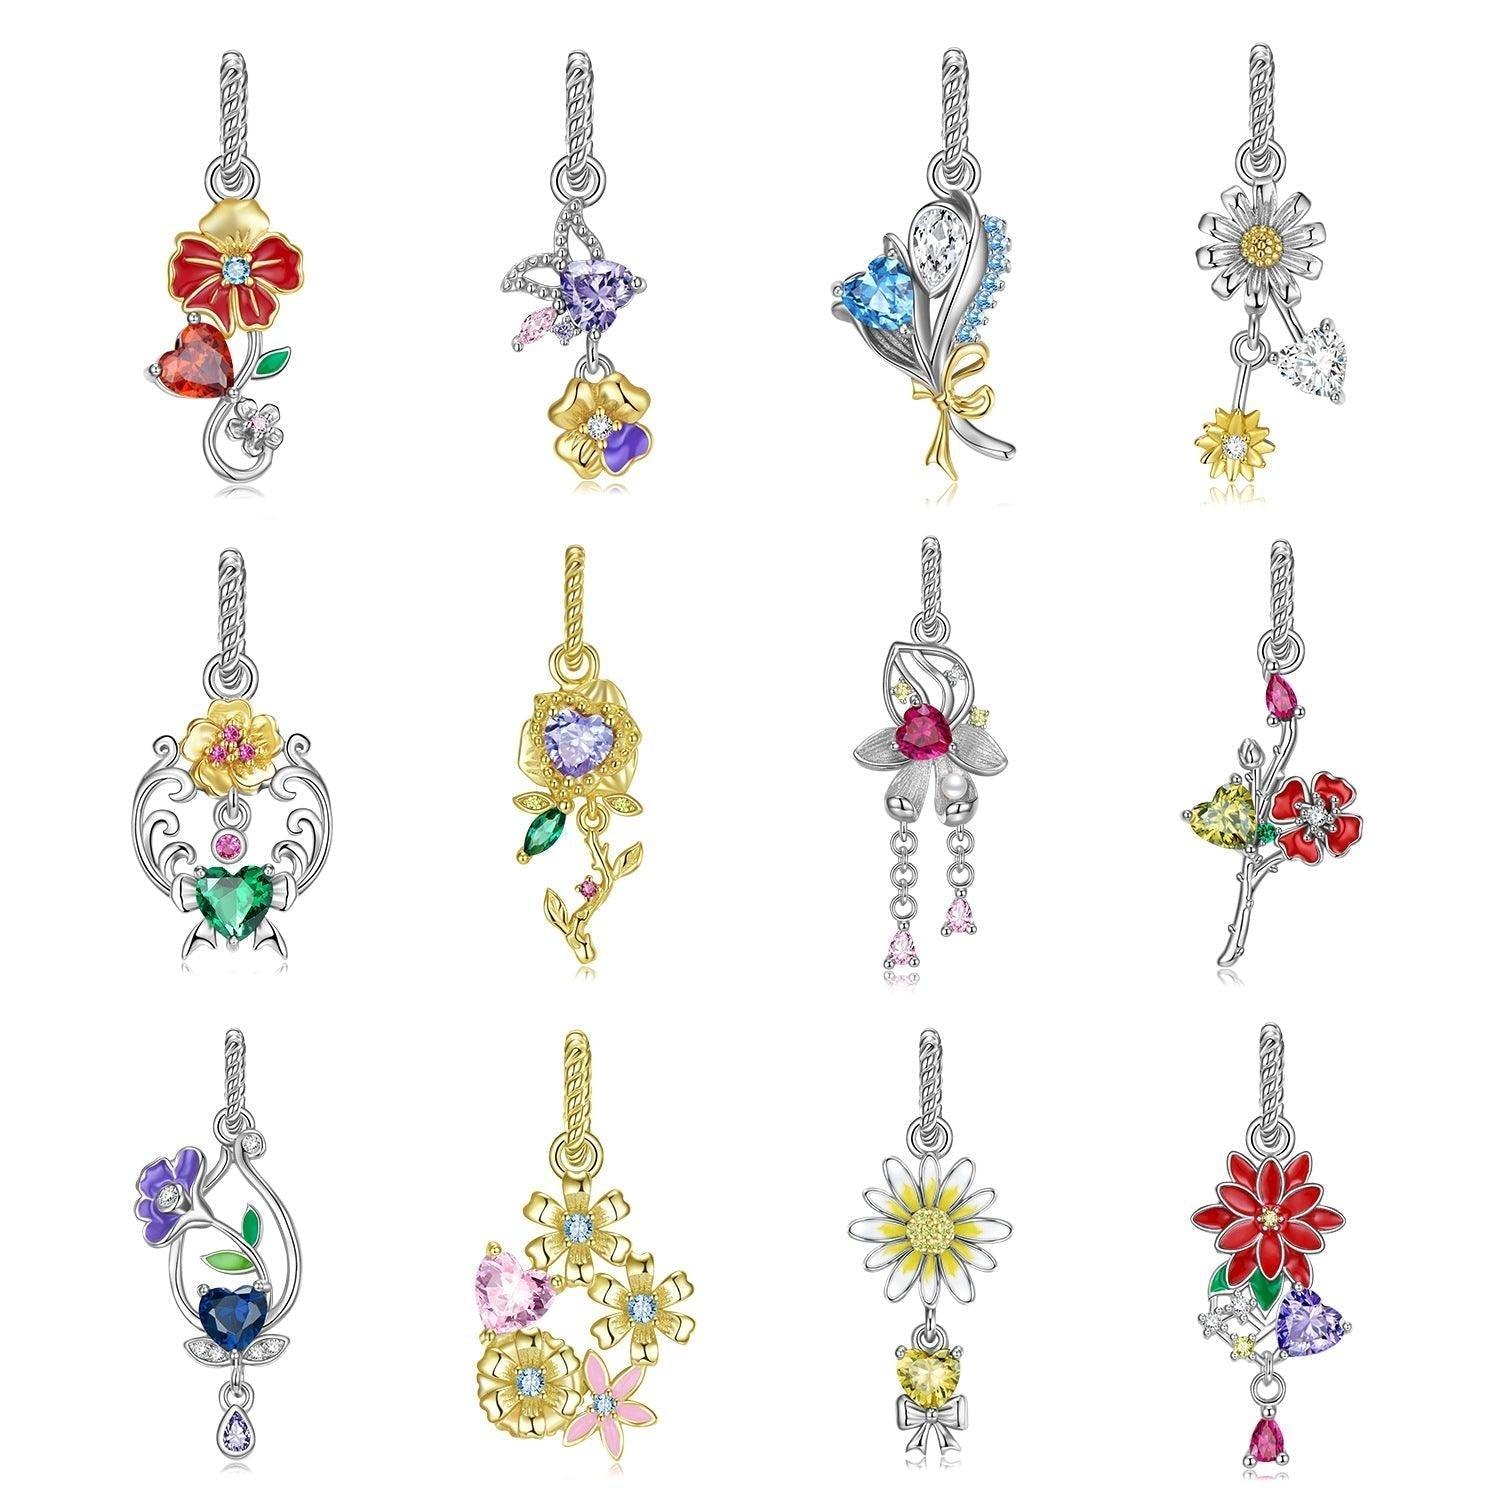 S925 Pure Silver Birthstone Flower Tale Beaded Charms in 2023 | S925 Pure Silver Birthstone Flower Tale Beaded Charms - undefined | birthstone flower Charms & Pendants, Birthstone Flower Tale Beaded Charms, brighton birthstone charms, Cute Charm | From Hunny Life | hunnylife.com